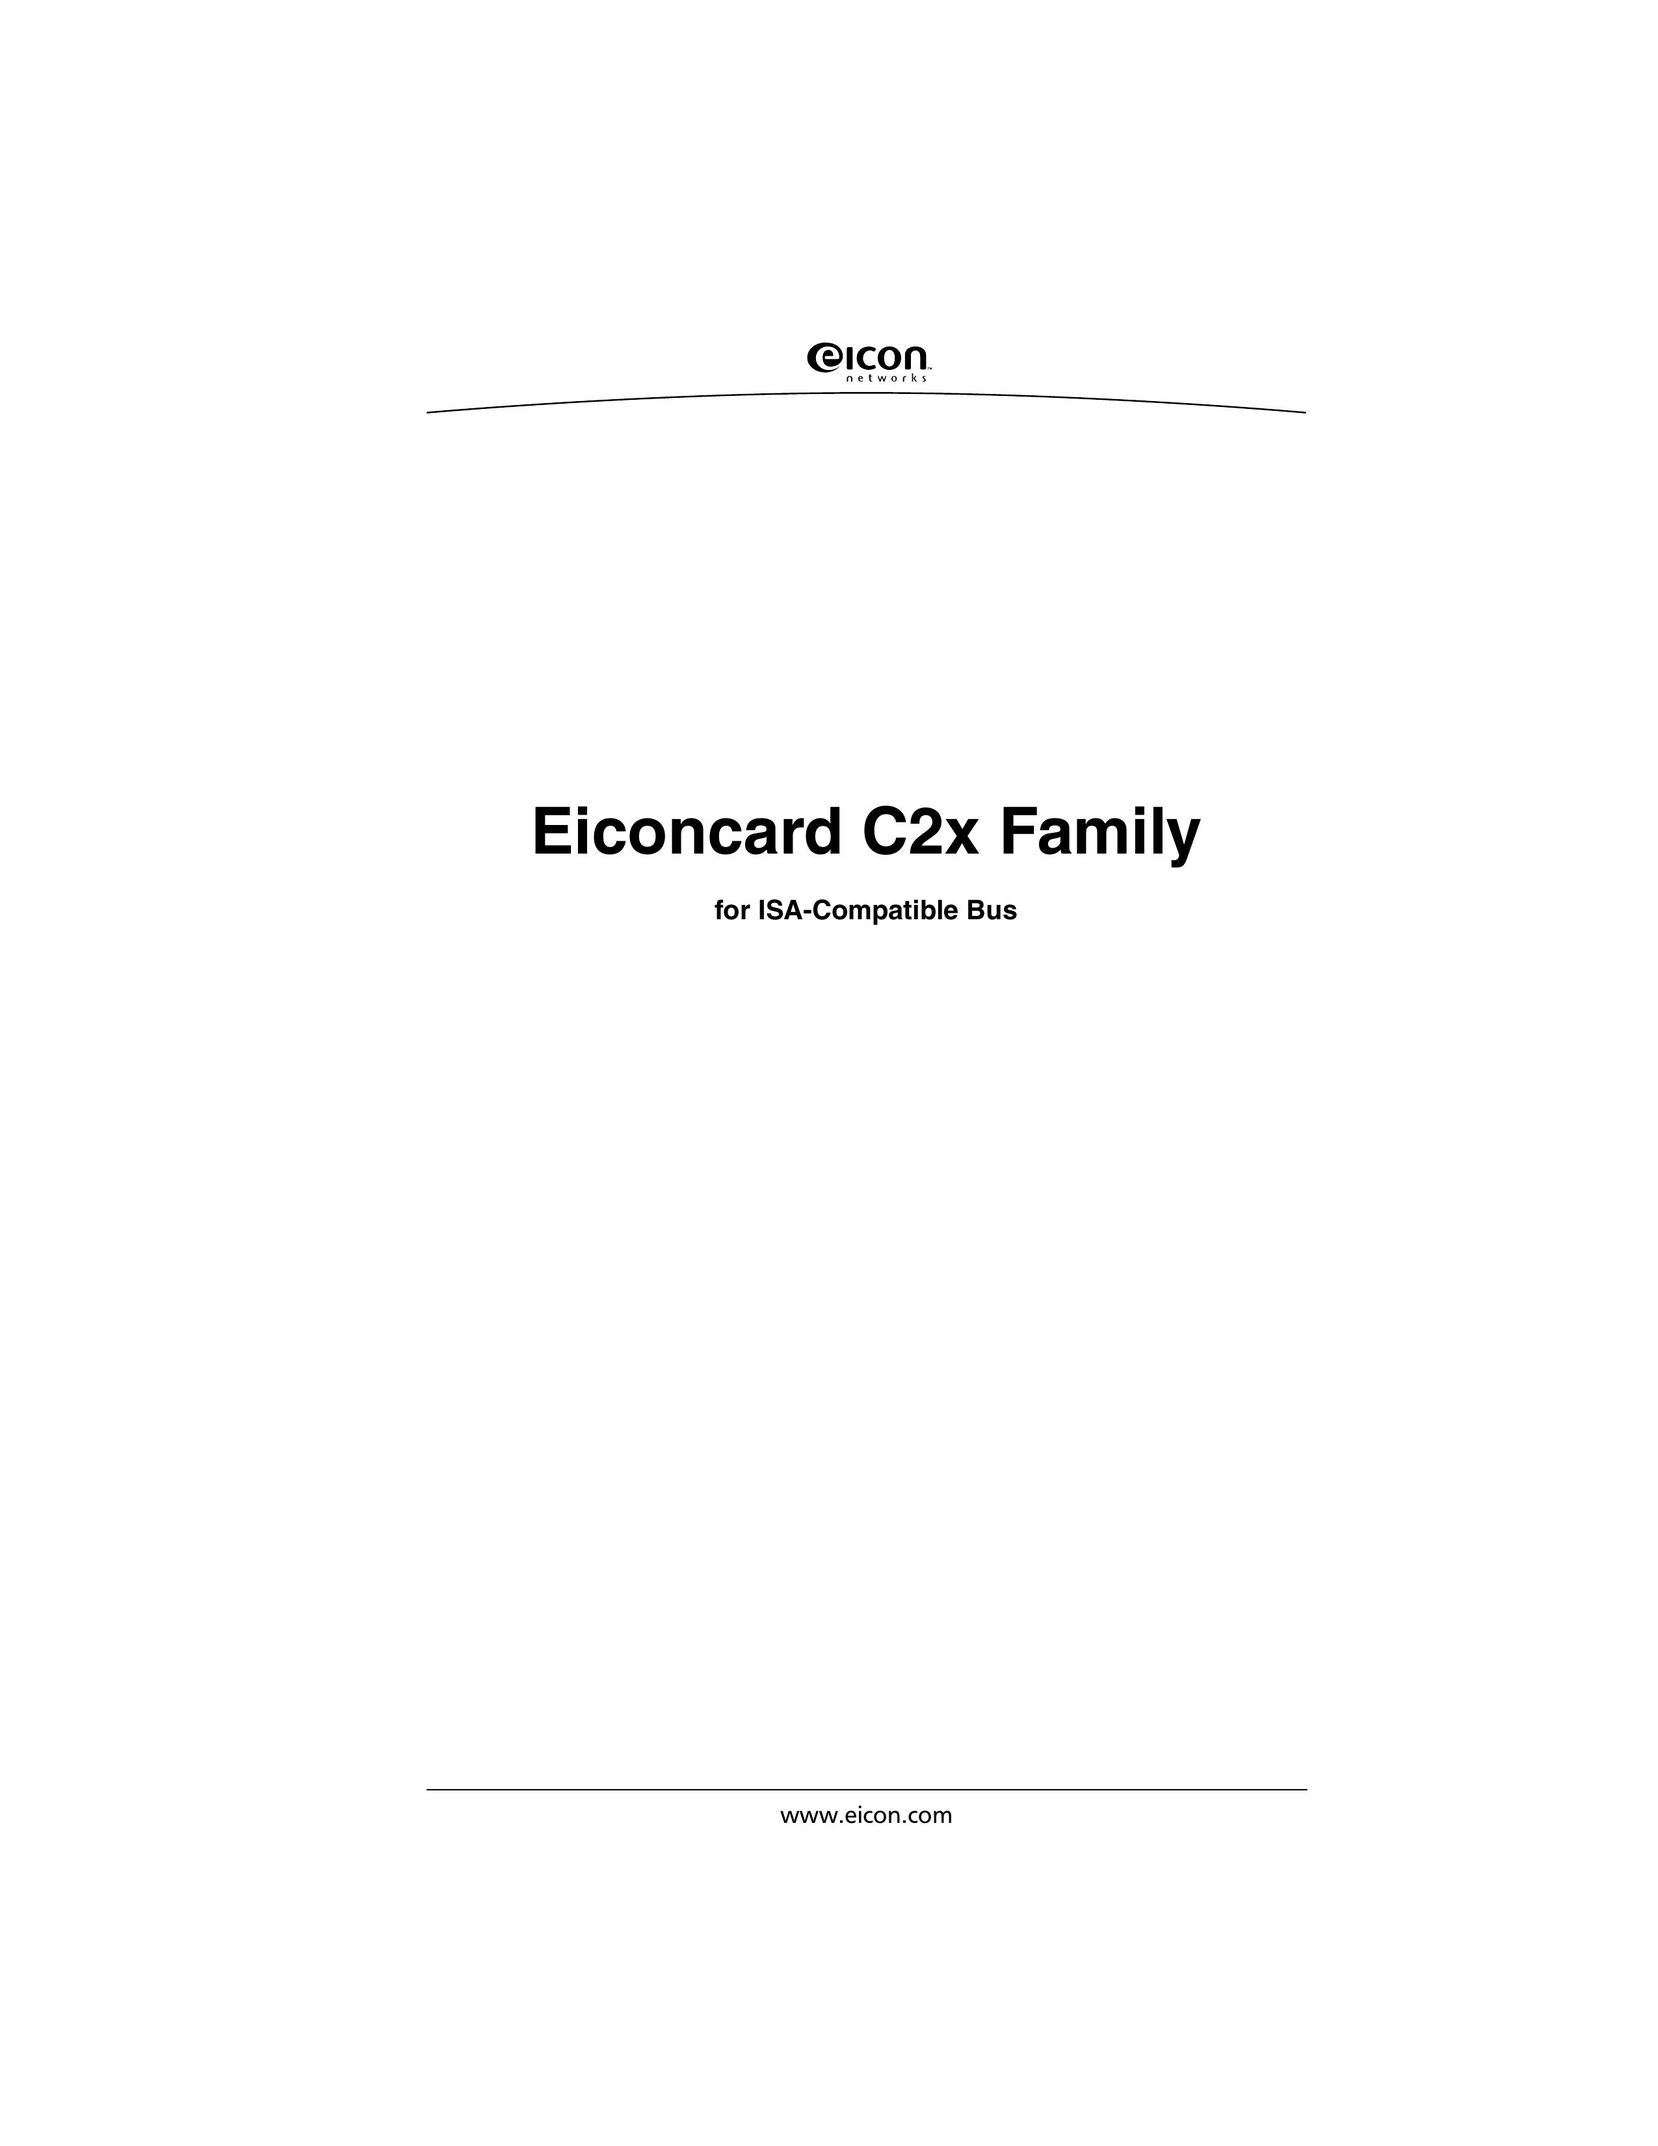 Eicon Networks C2x Family Network Card User Manual